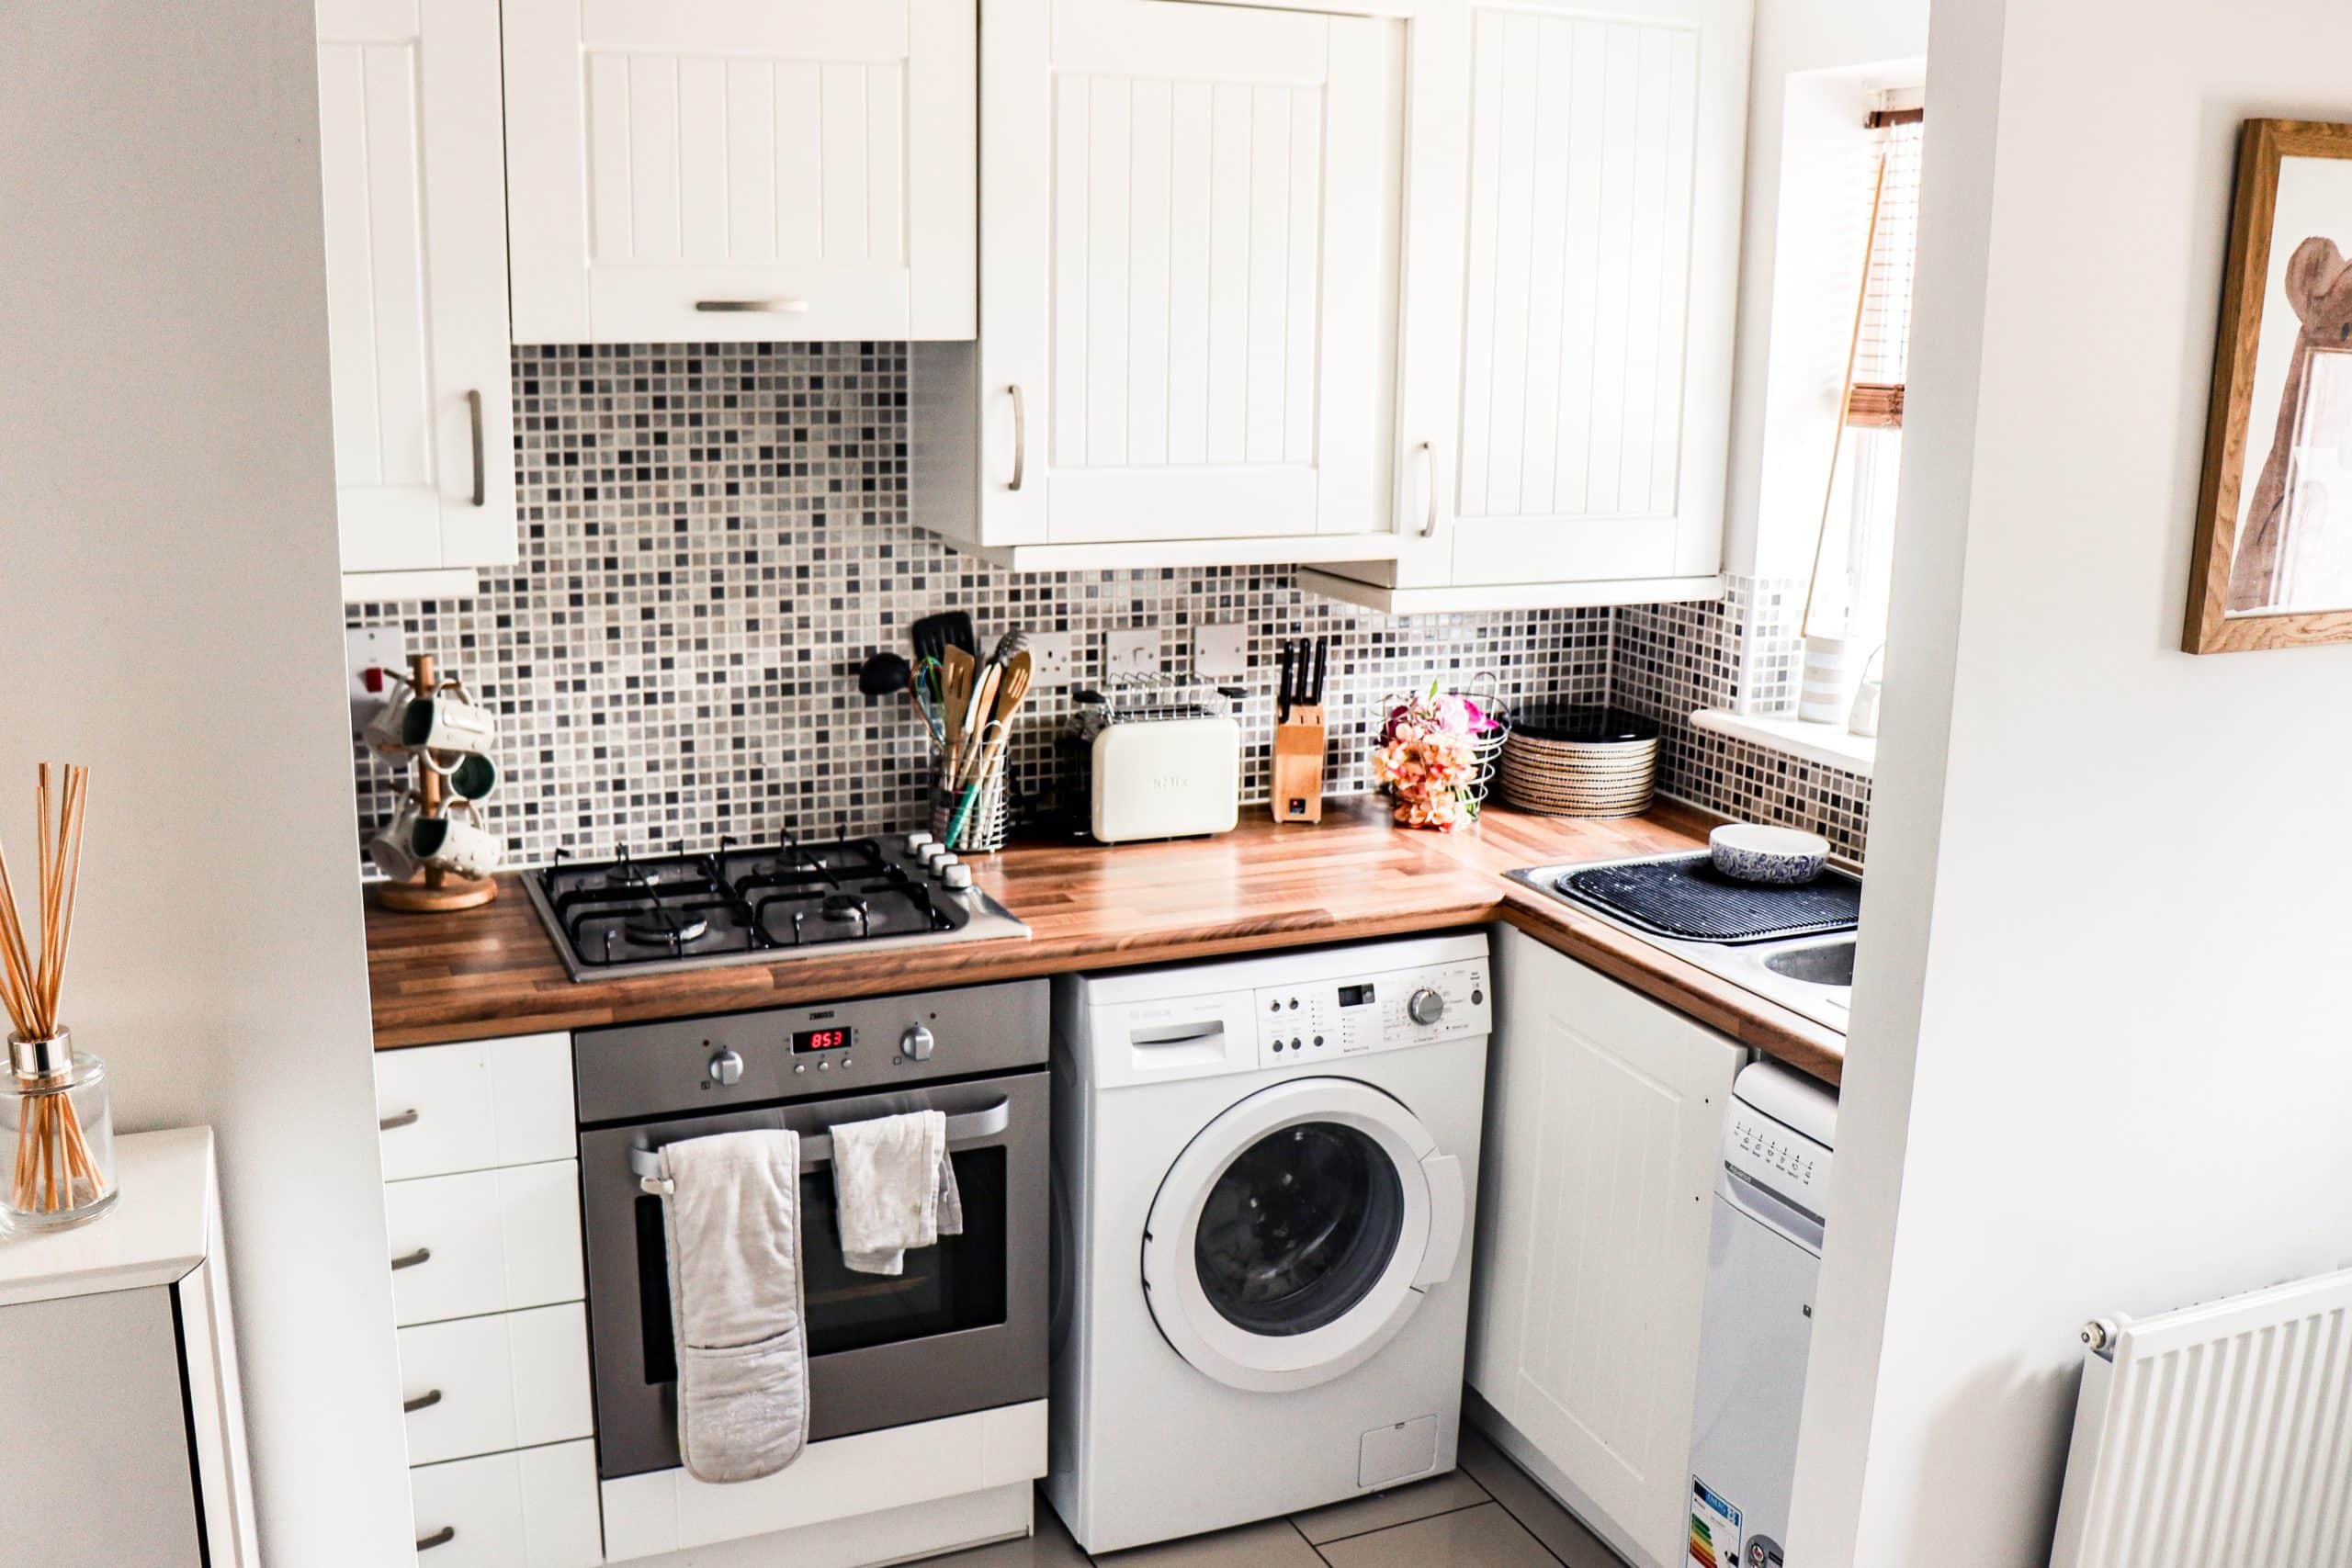 Small Laundry Room Ideas: 19 Compact Designs To Save Space